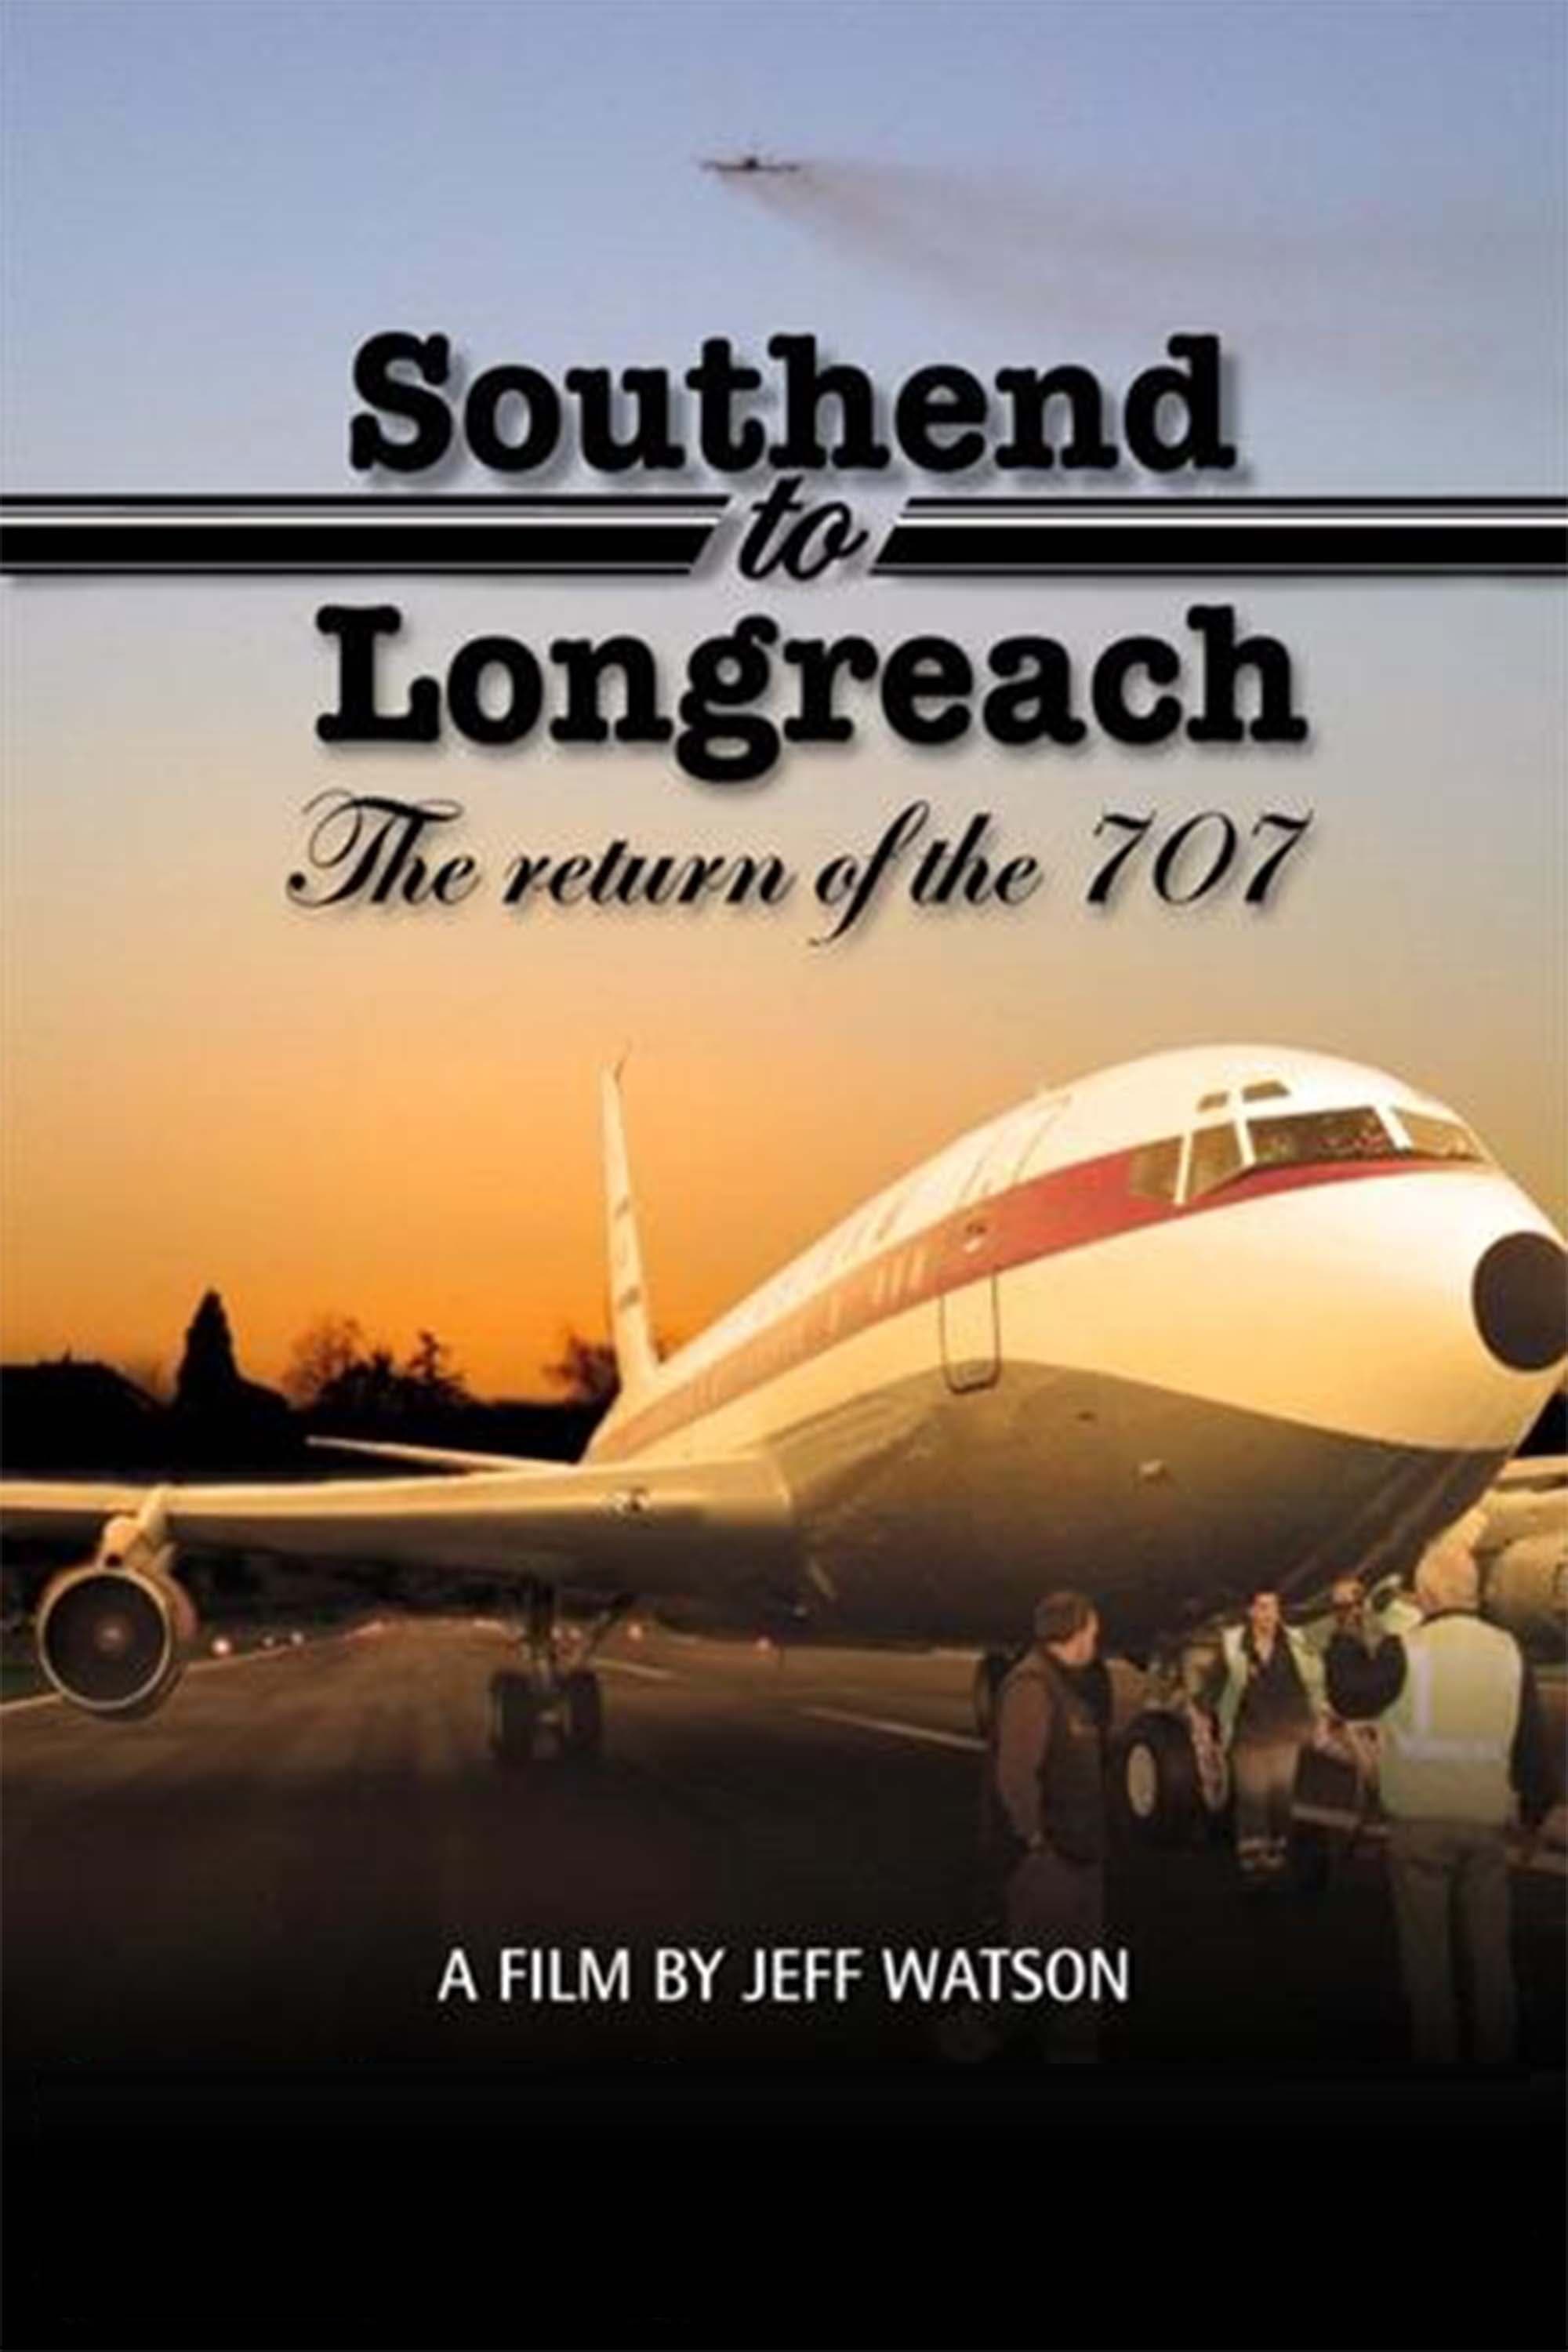 Southend to Longreach: The Return of the 707